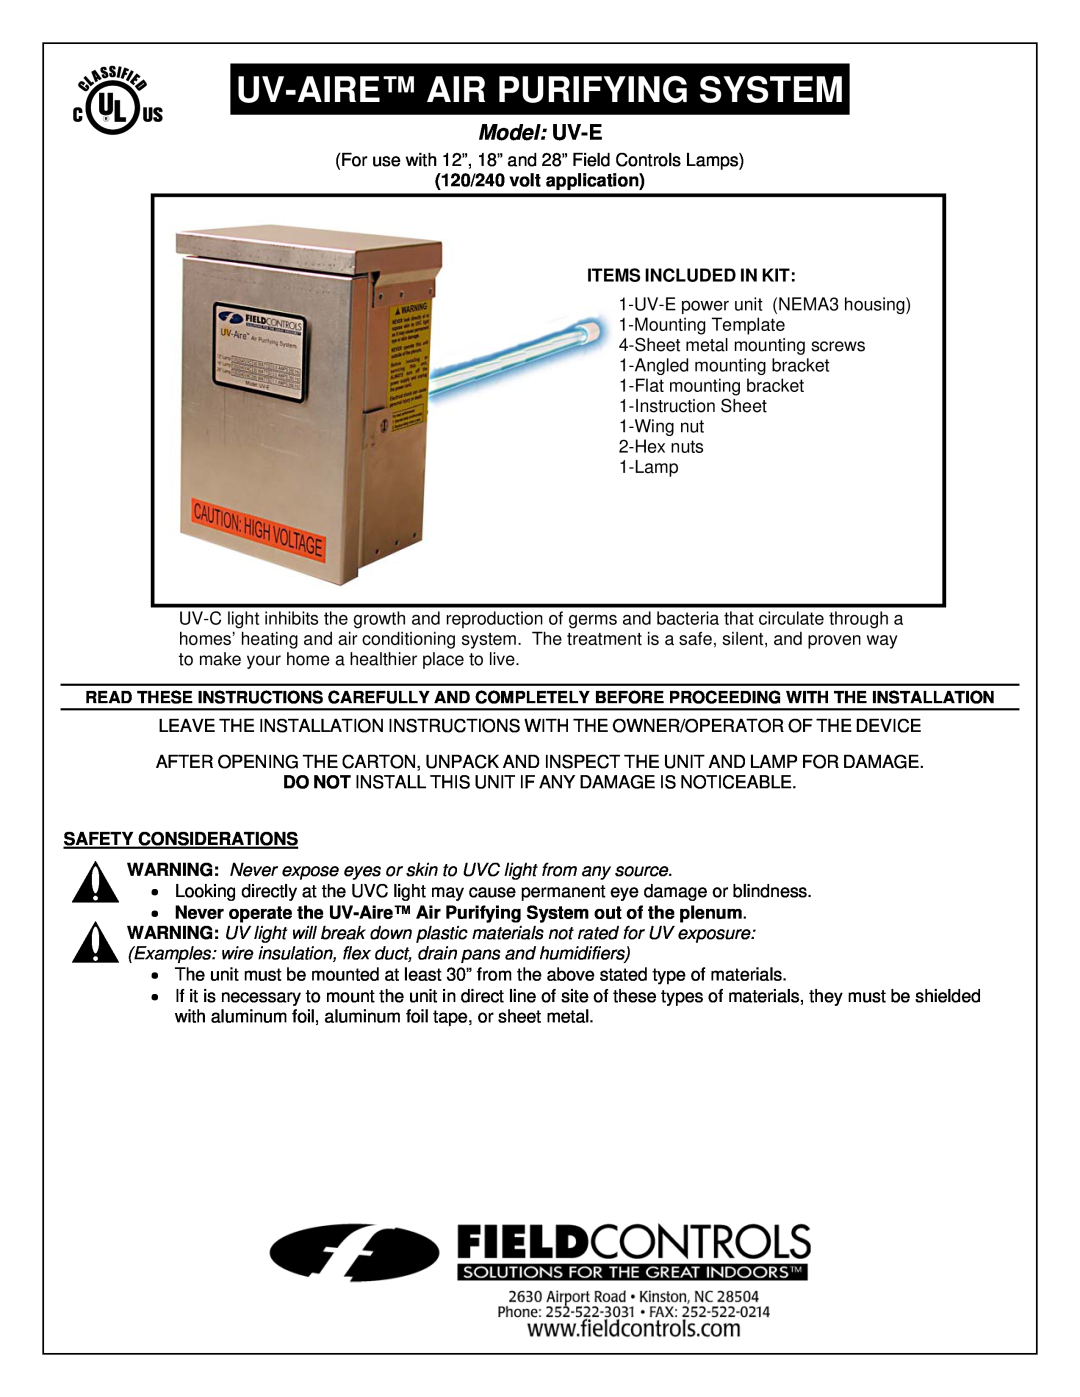 Field Controls UV-E installation instructions 120/240 volt application ITEMS INCLUDED IN KIT, Safety Considerations 